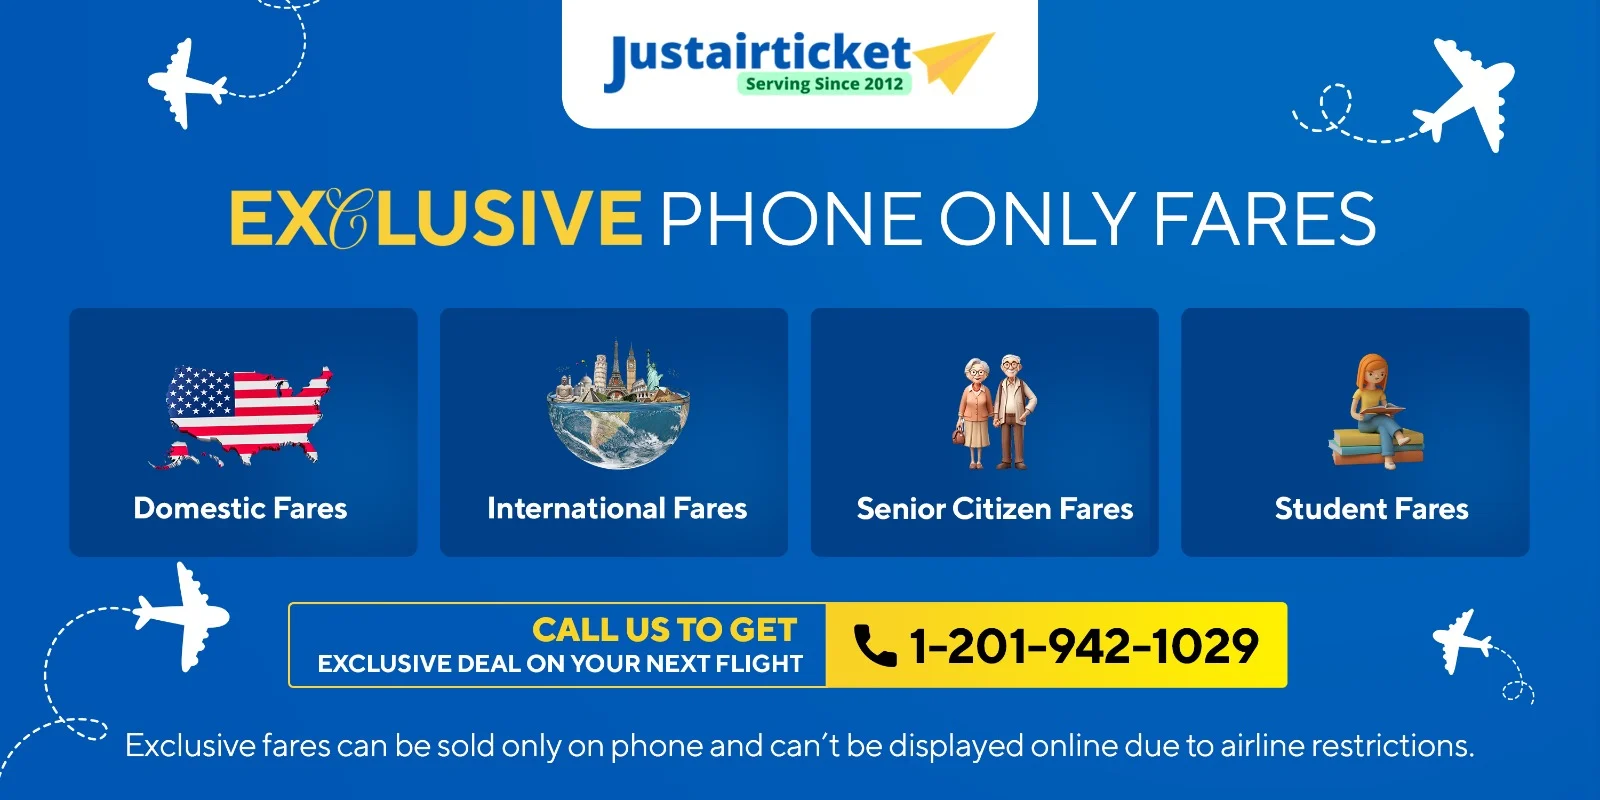 JustAirTicket Exclusive Phone Only Fares